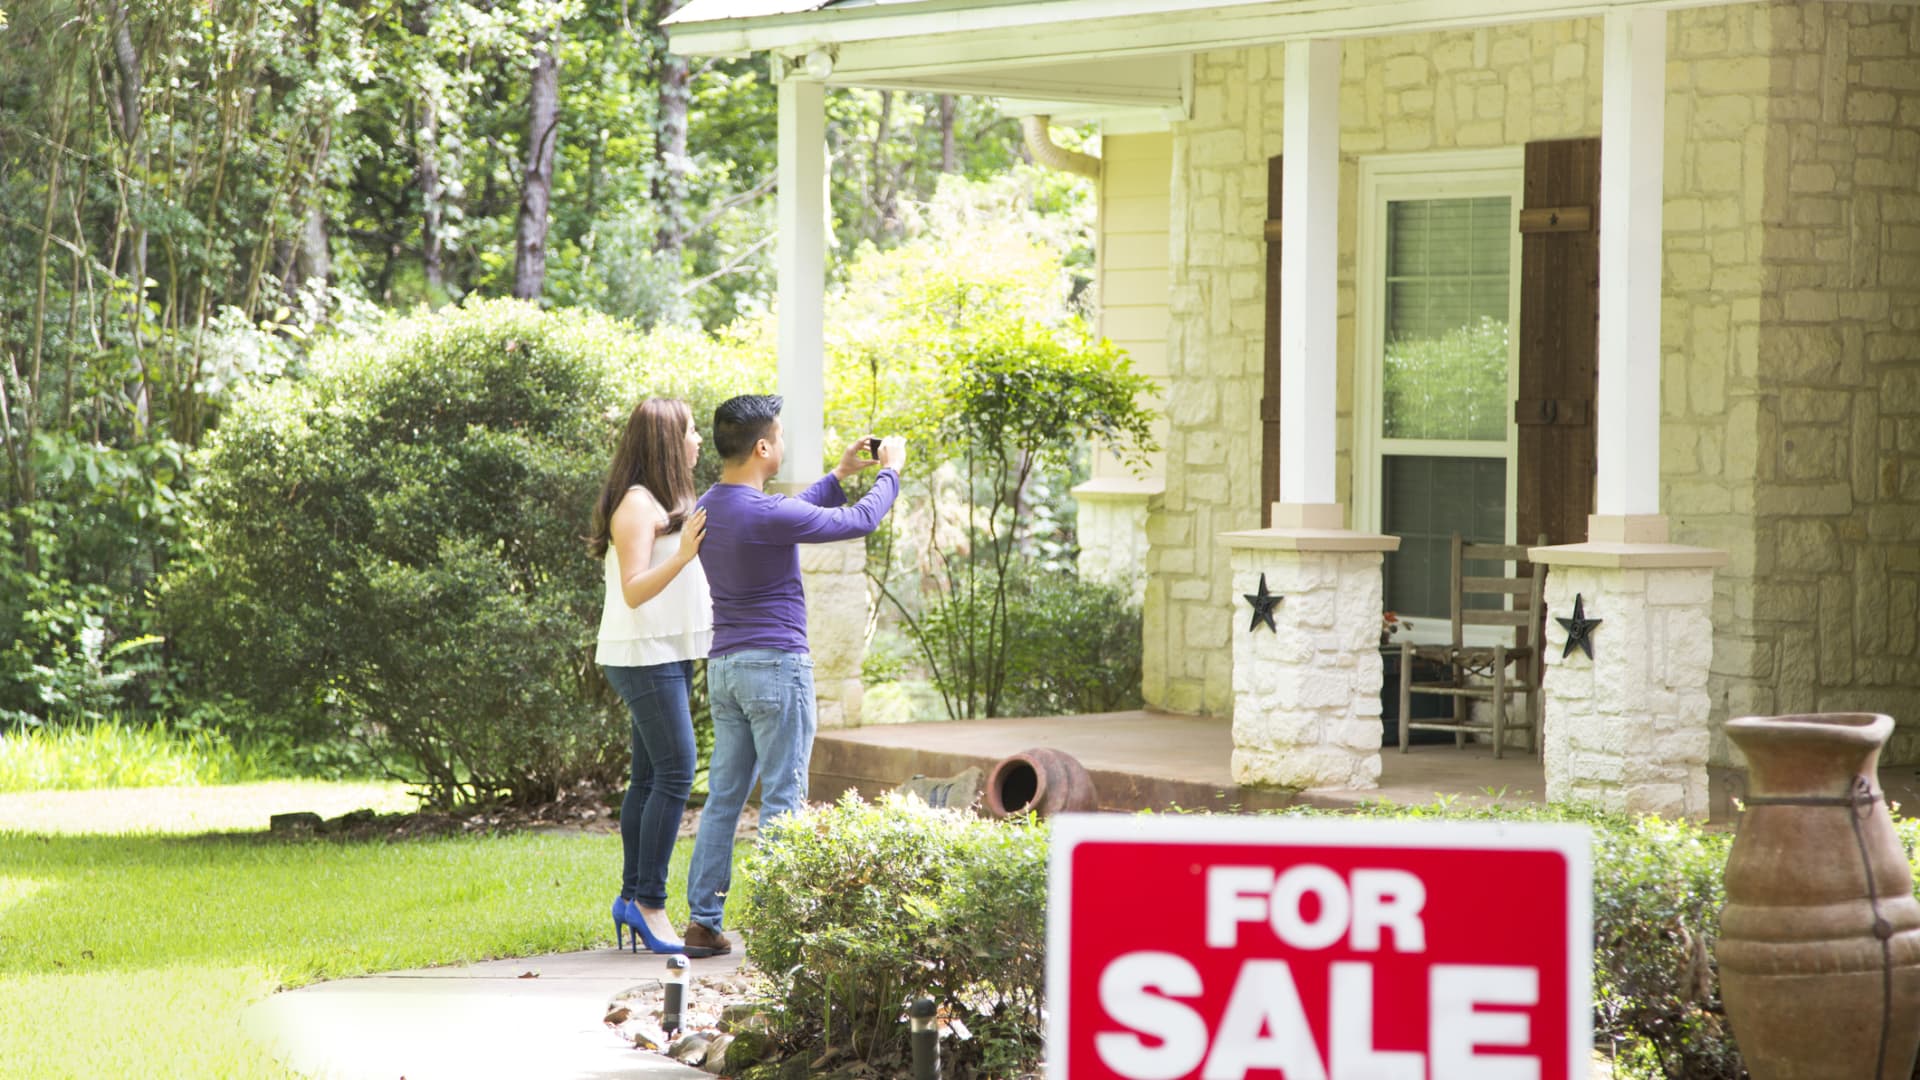 92% of millennial homebuyers say inflation has impacted their buy plans, however most are plowing forward anyway, research reveals